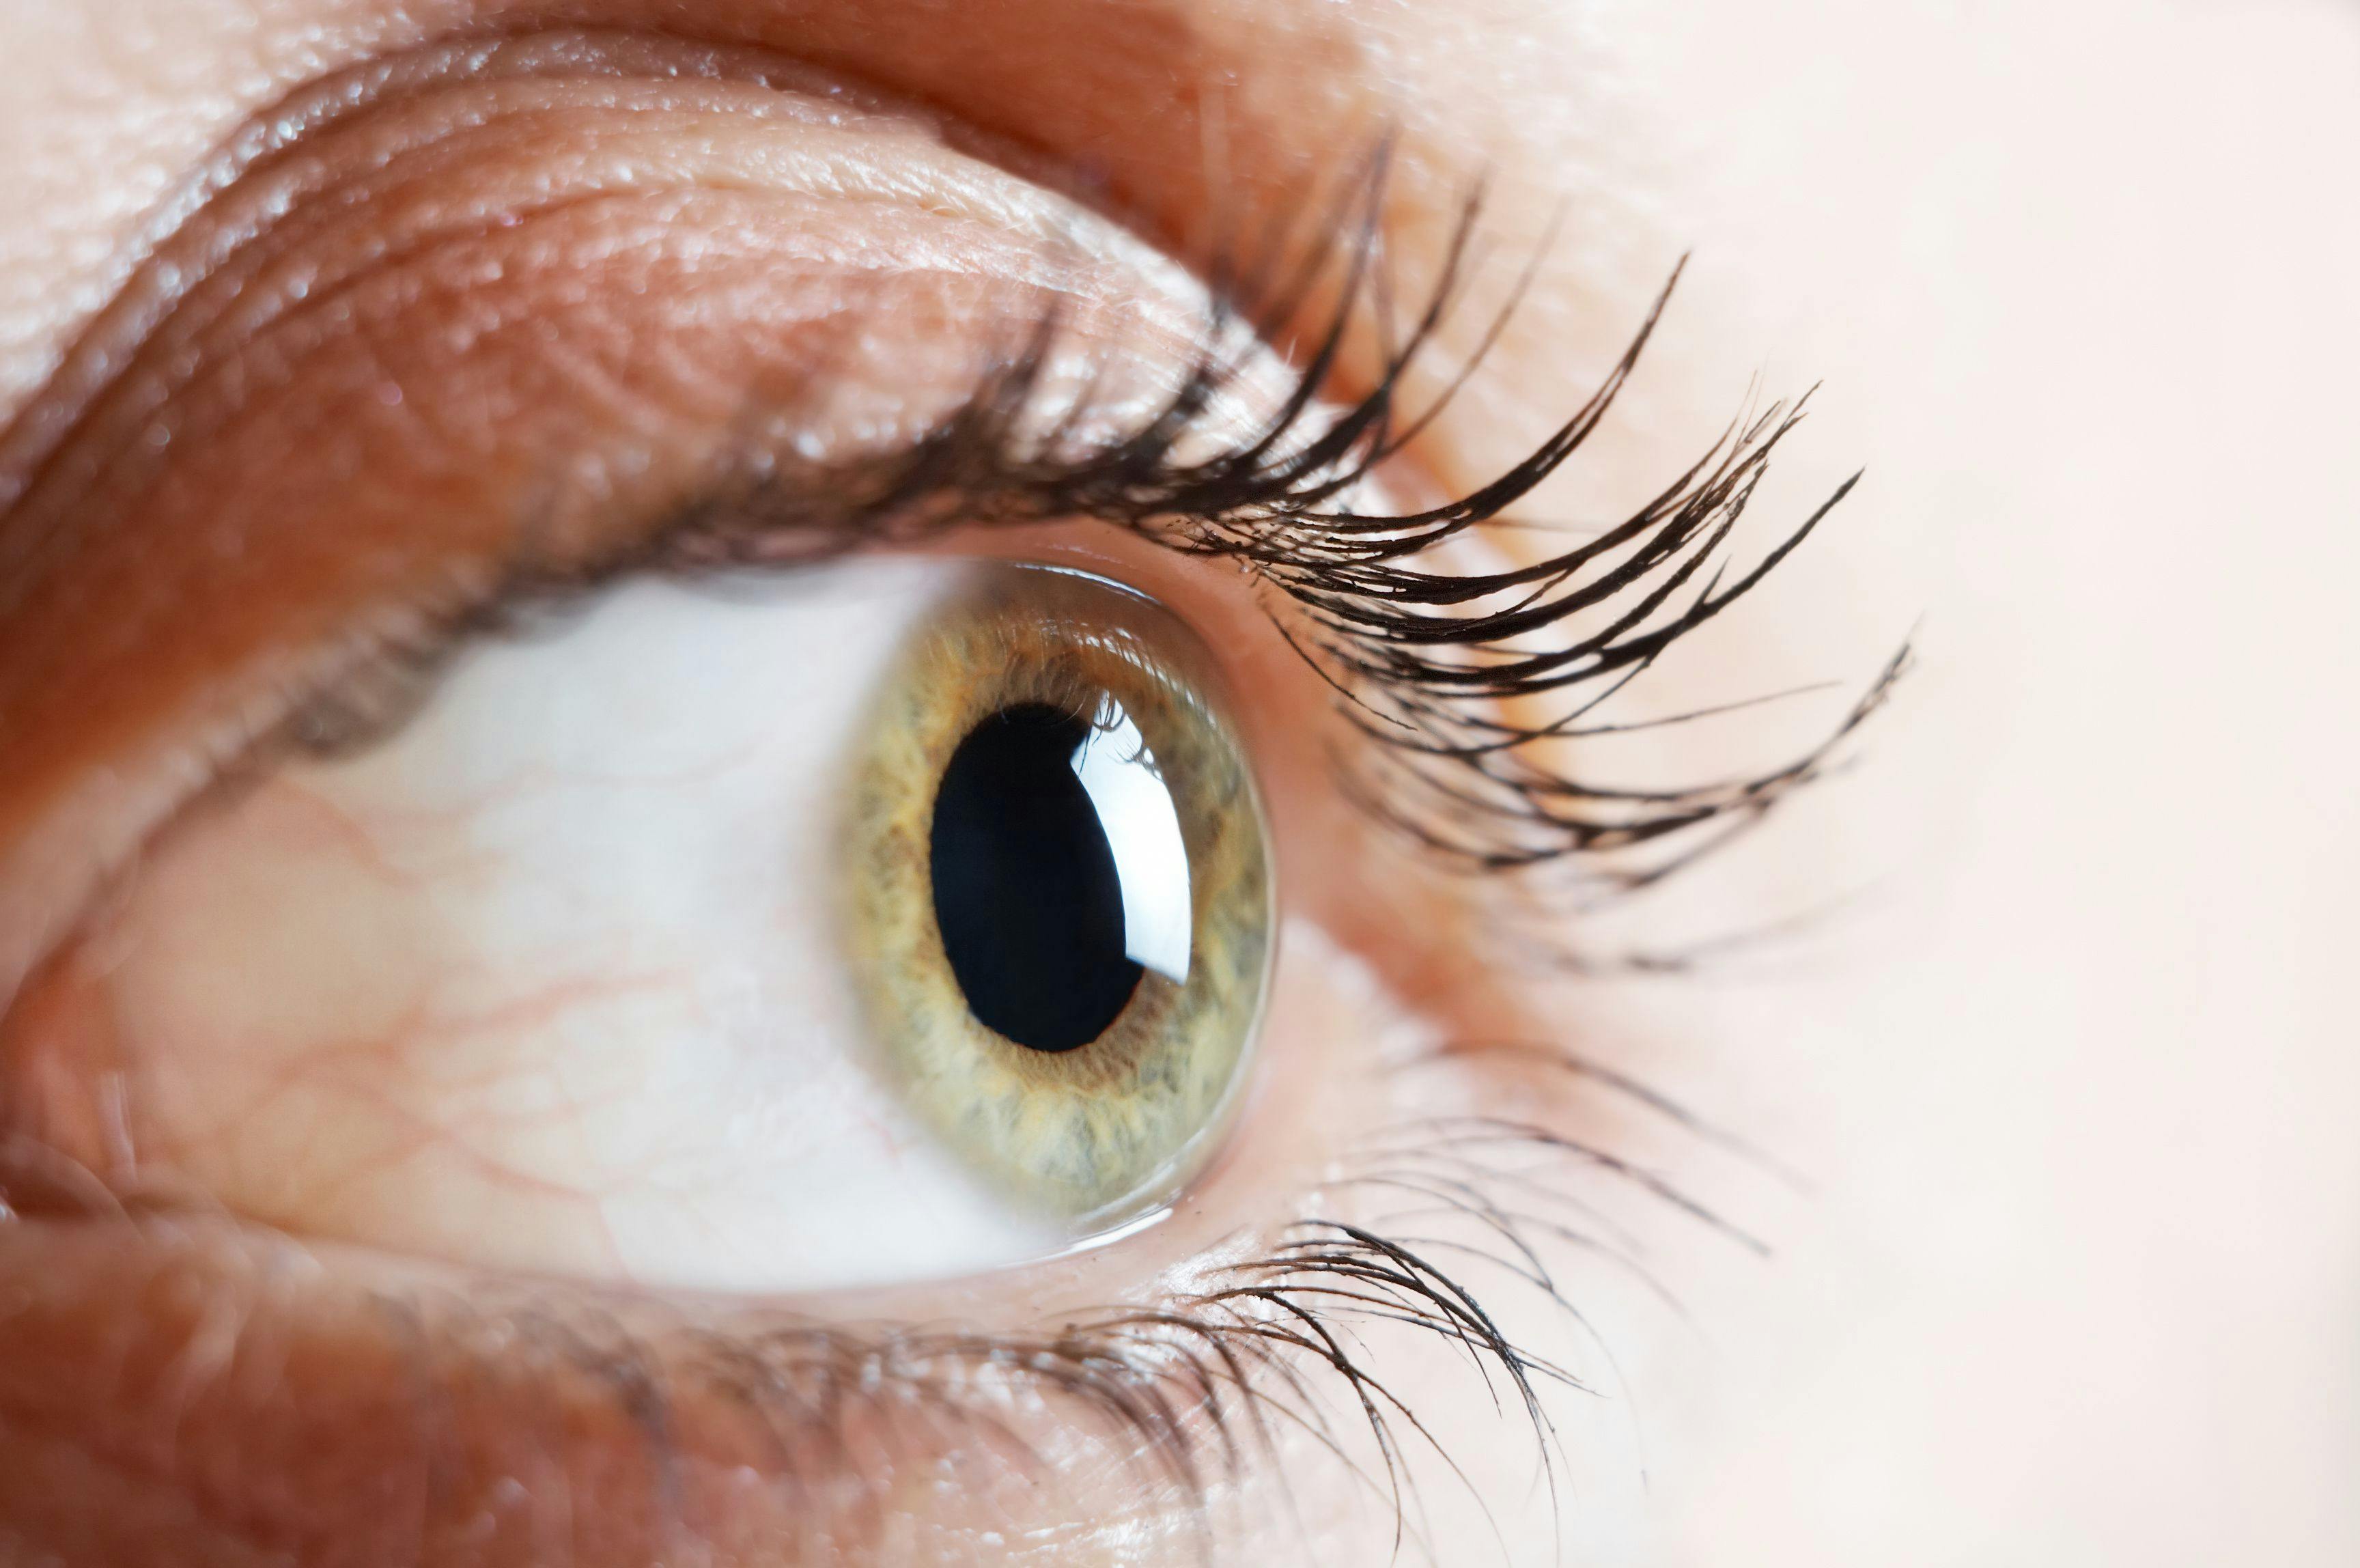 AK is one type of microbial keratitis. AK can cause extreme levels of pain as well as light sensitivity and vision loss. (Image courtesy of Adobe Stock)